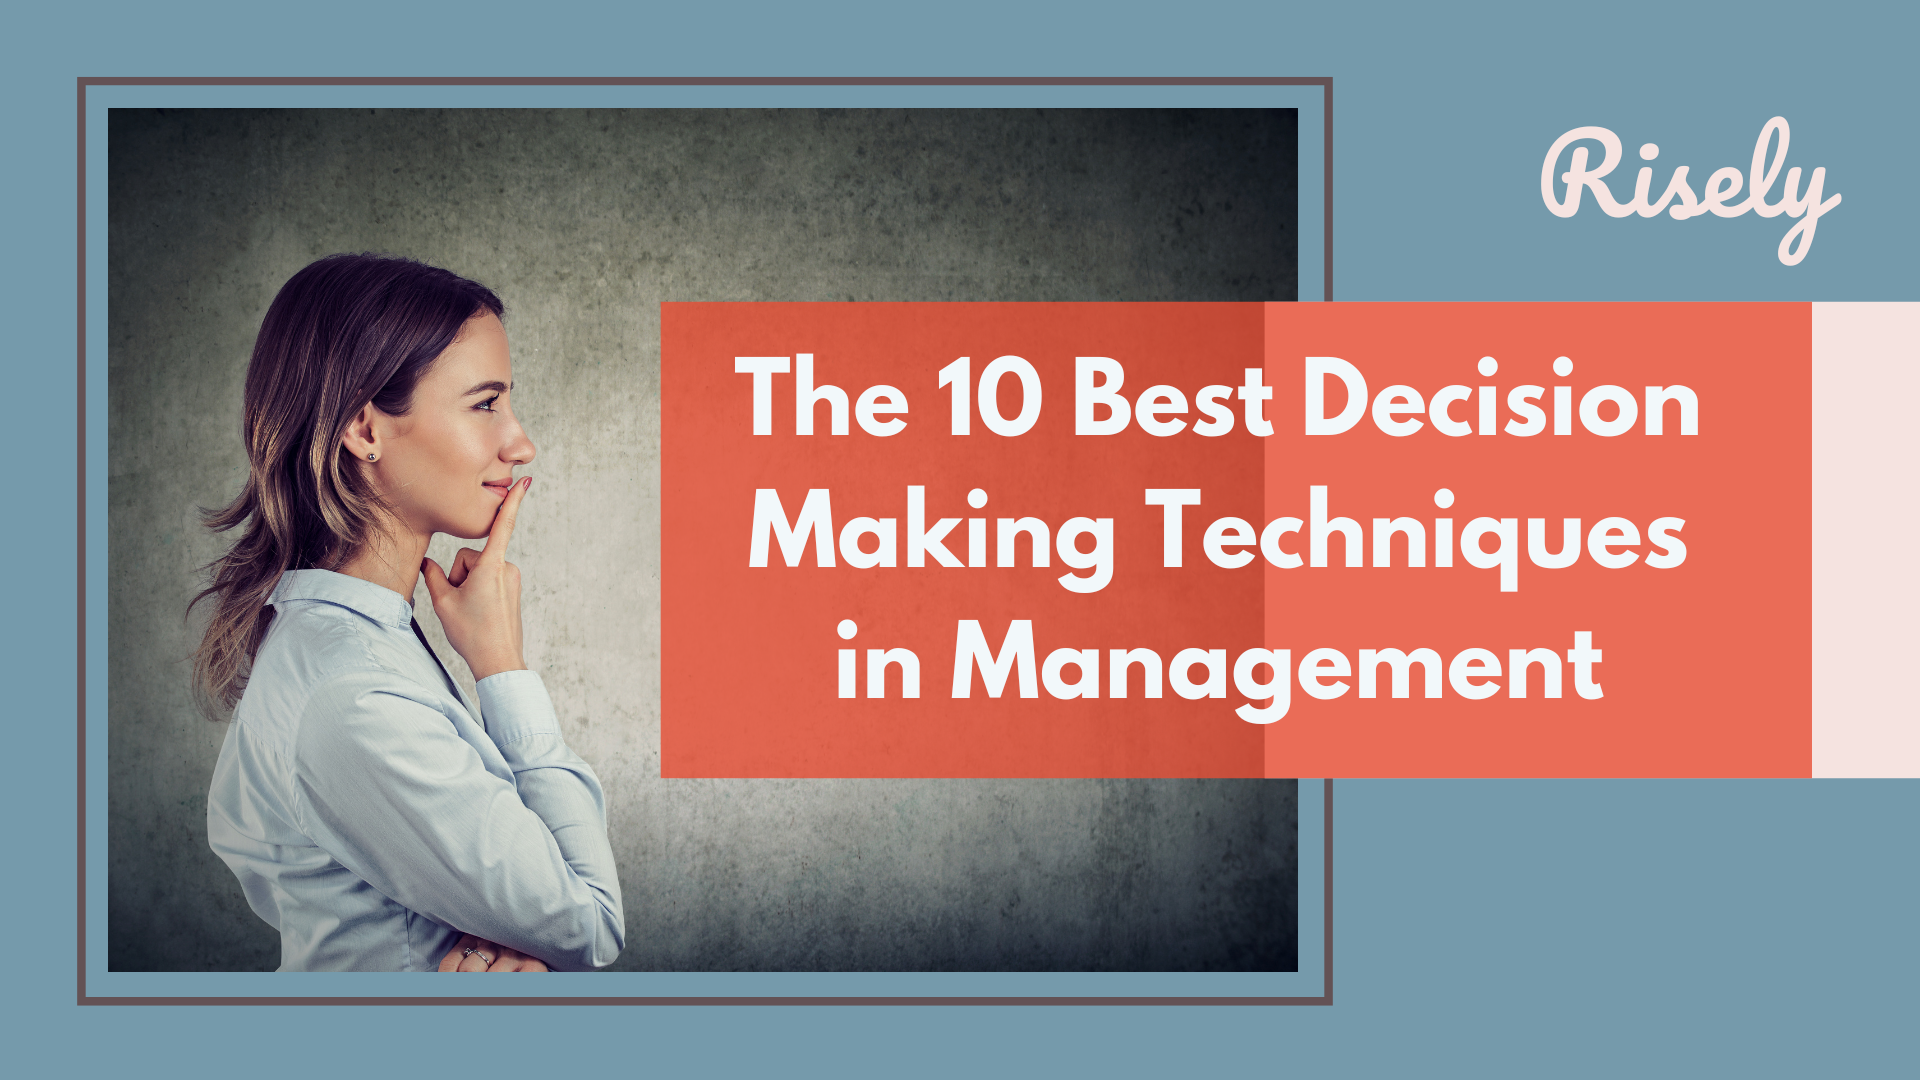 The 10 Best Decision Making Techniques in Management